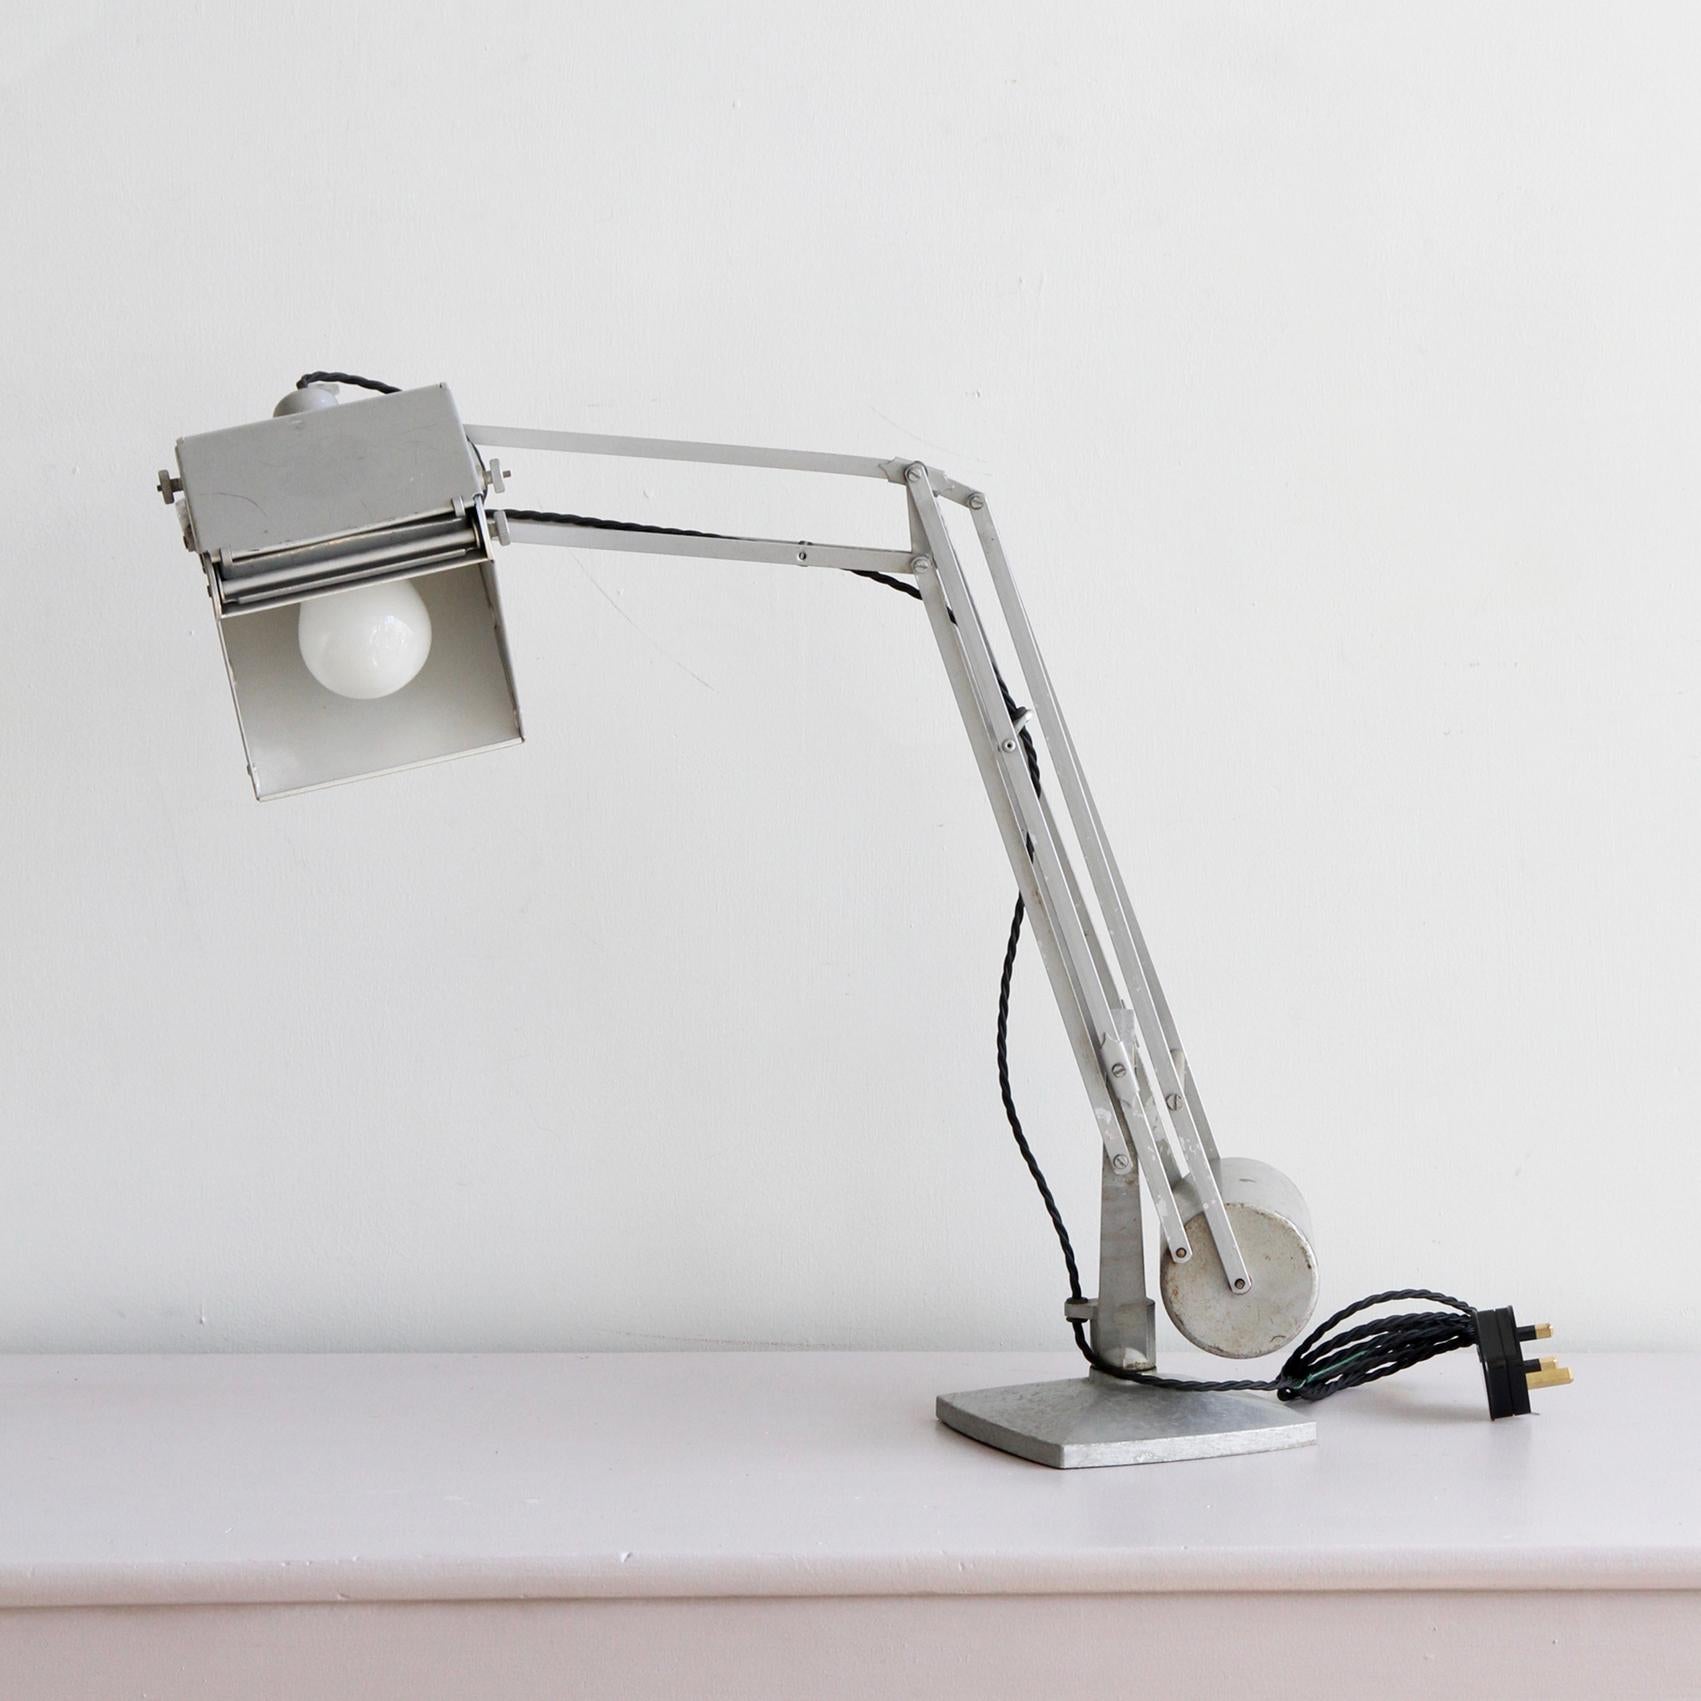 A Hadrill and Horstmann “Pluslite” desk lamp circa 1940s. The silver grey adjustable frame with counter balance features the cast H & H monogram and a retractable magnifier. The unique design of the steel counterbalance, which rolls in full motion